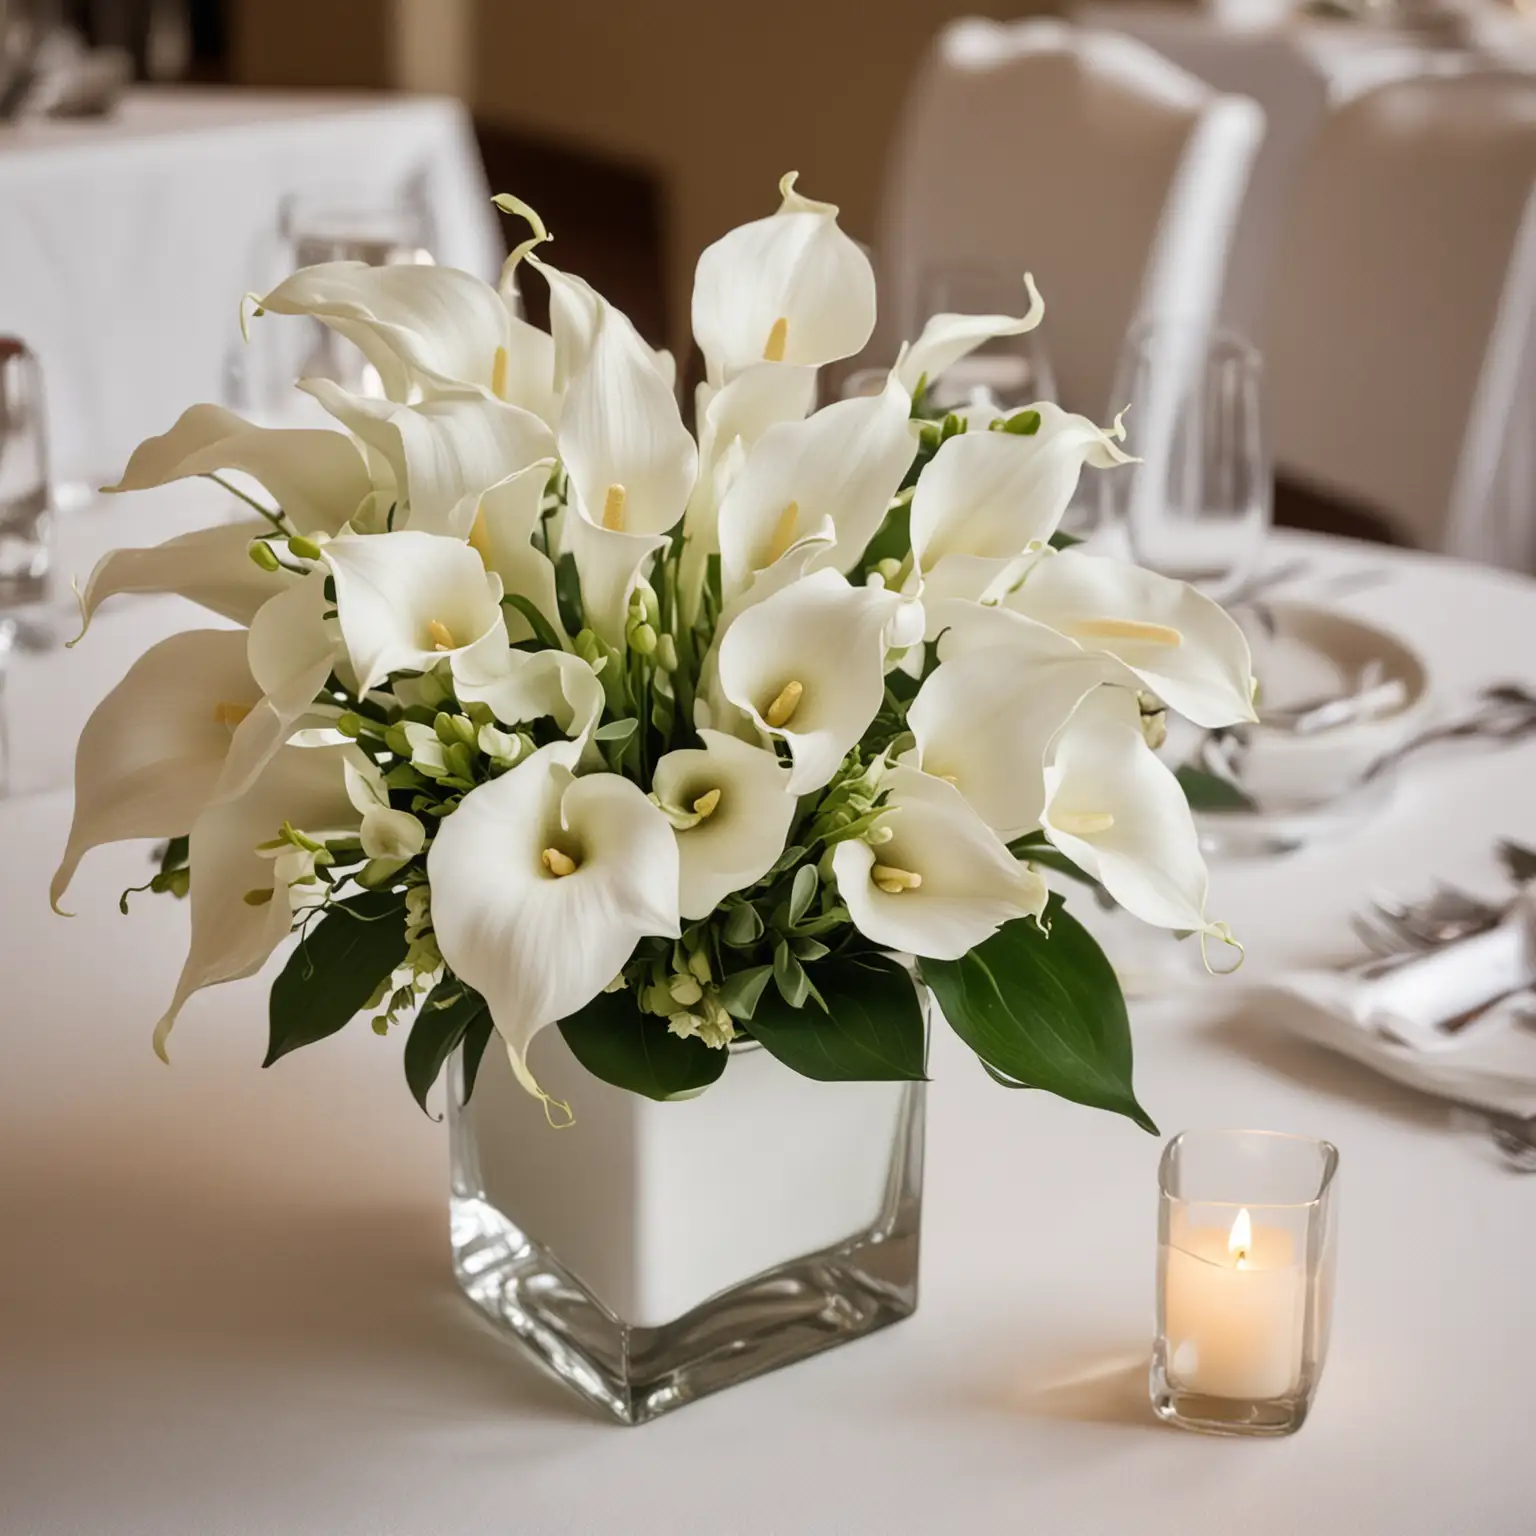 simple white wedding centerpiece with white square ceramic vase holding small bouquet of white calla lilies